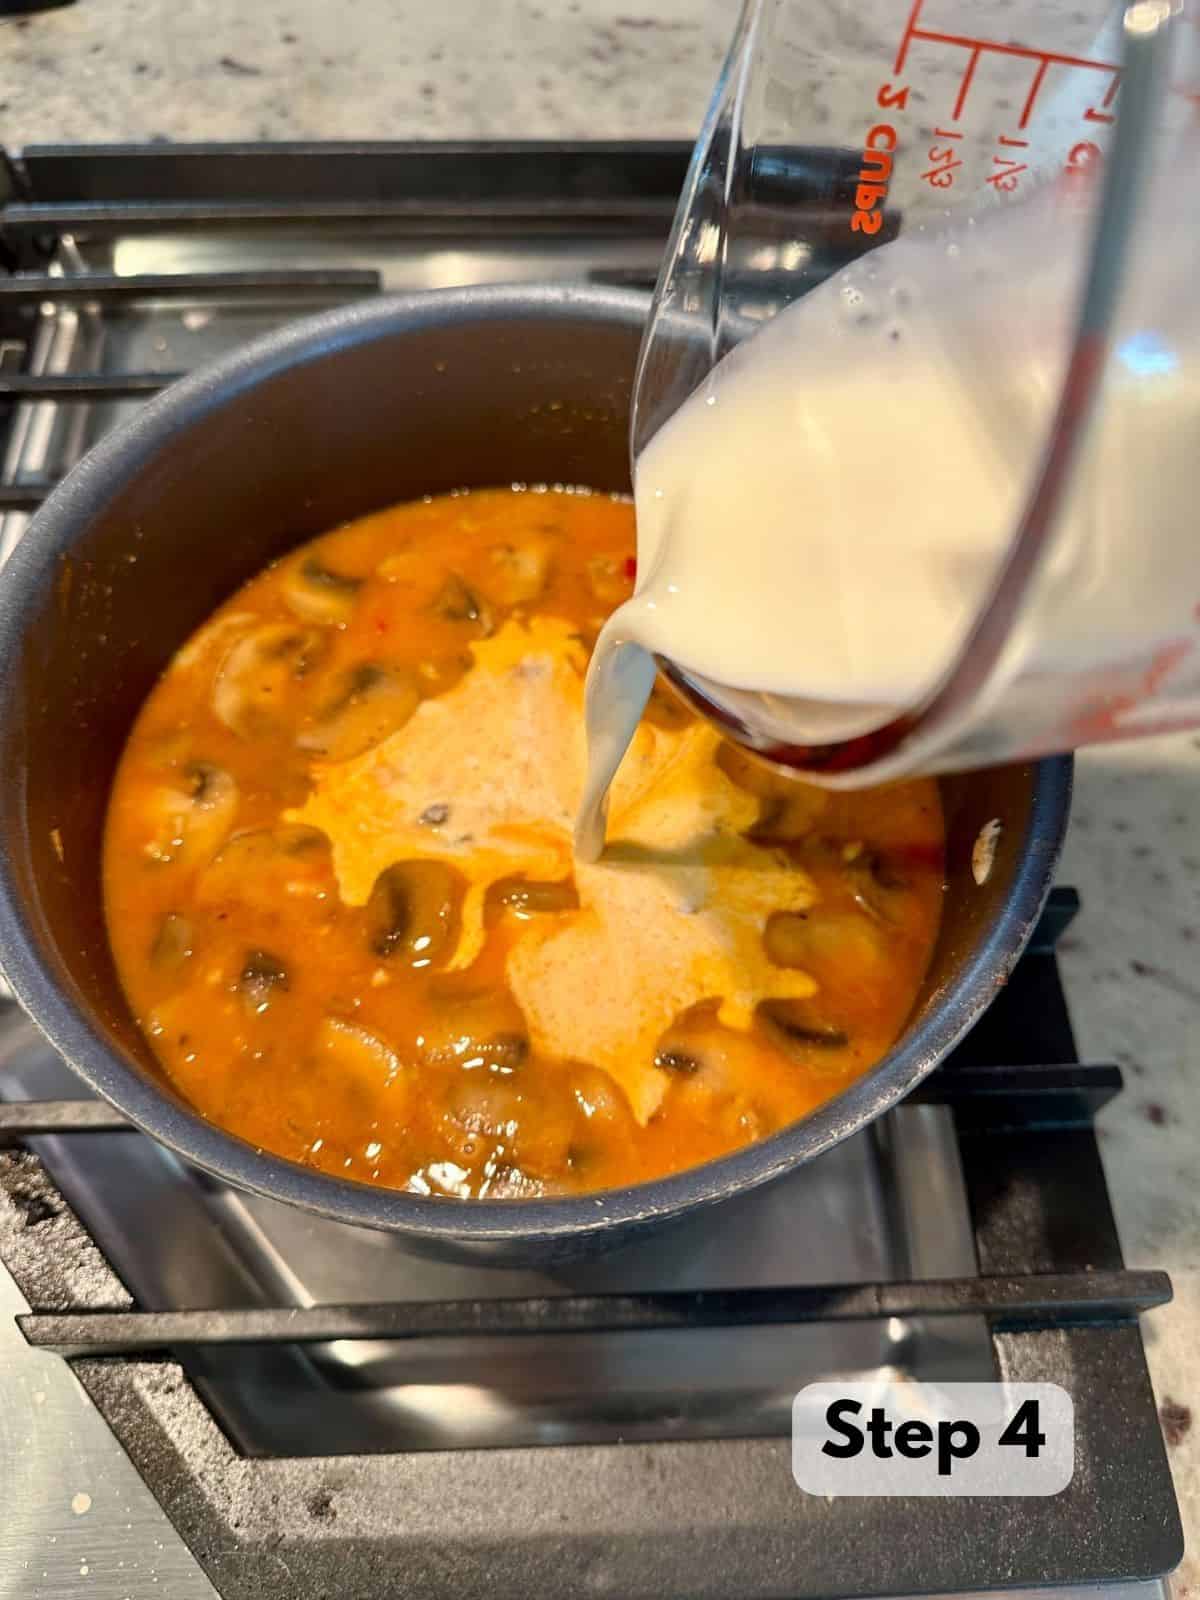 A measuring cup of heavy cream being poured into a saucepot on a stovetop.